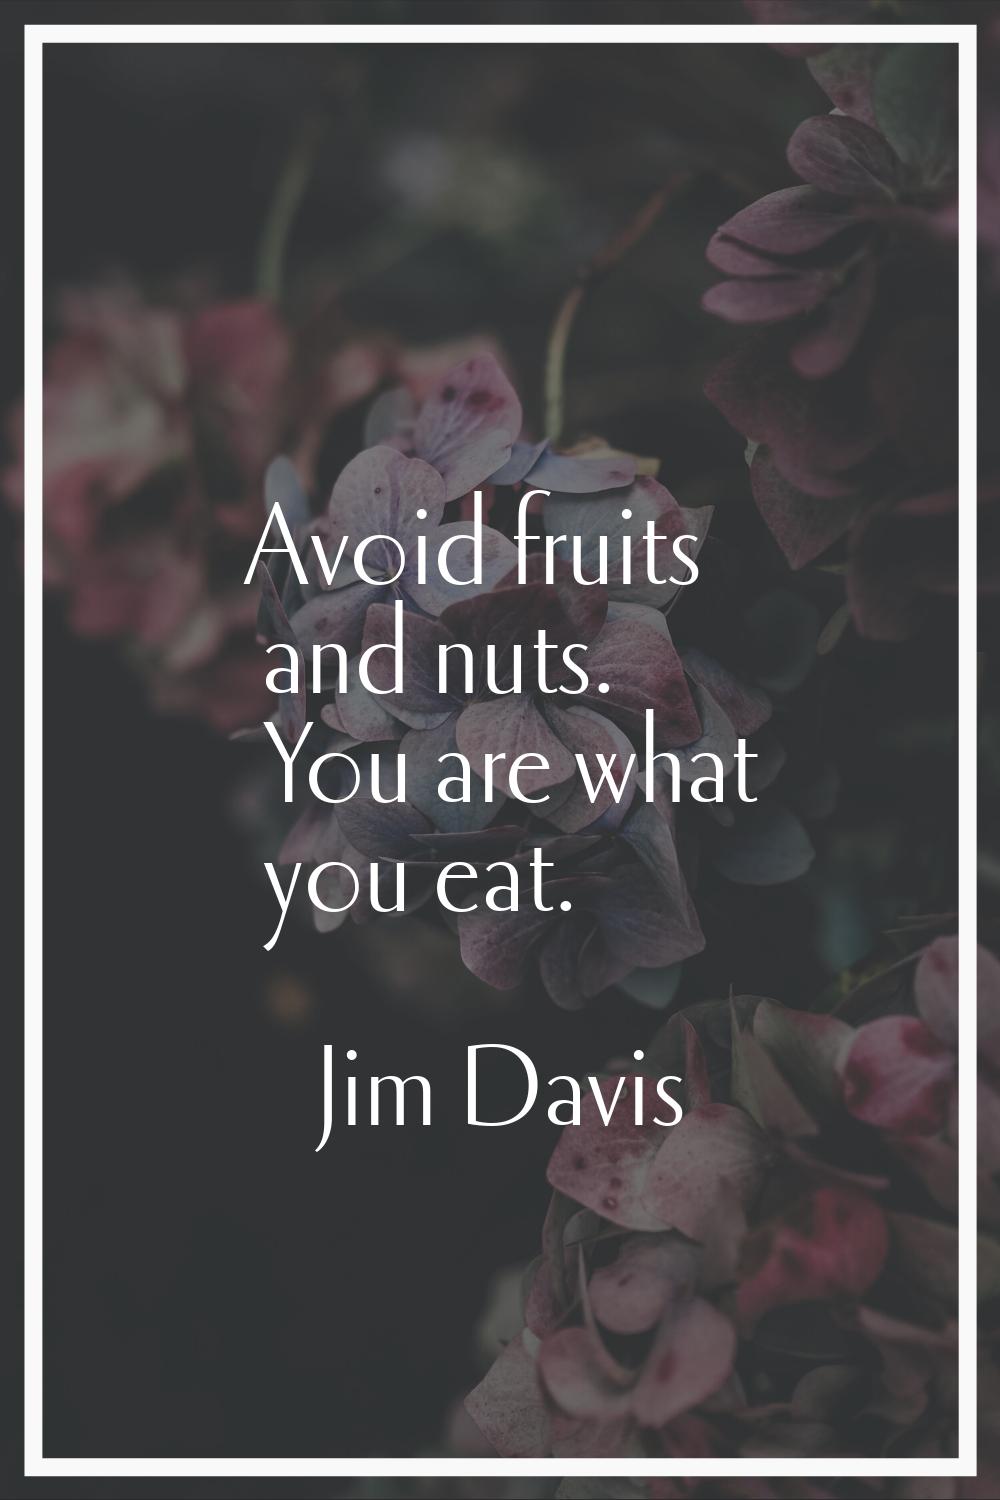 Avoid fruits and nuts. You are what you eat.